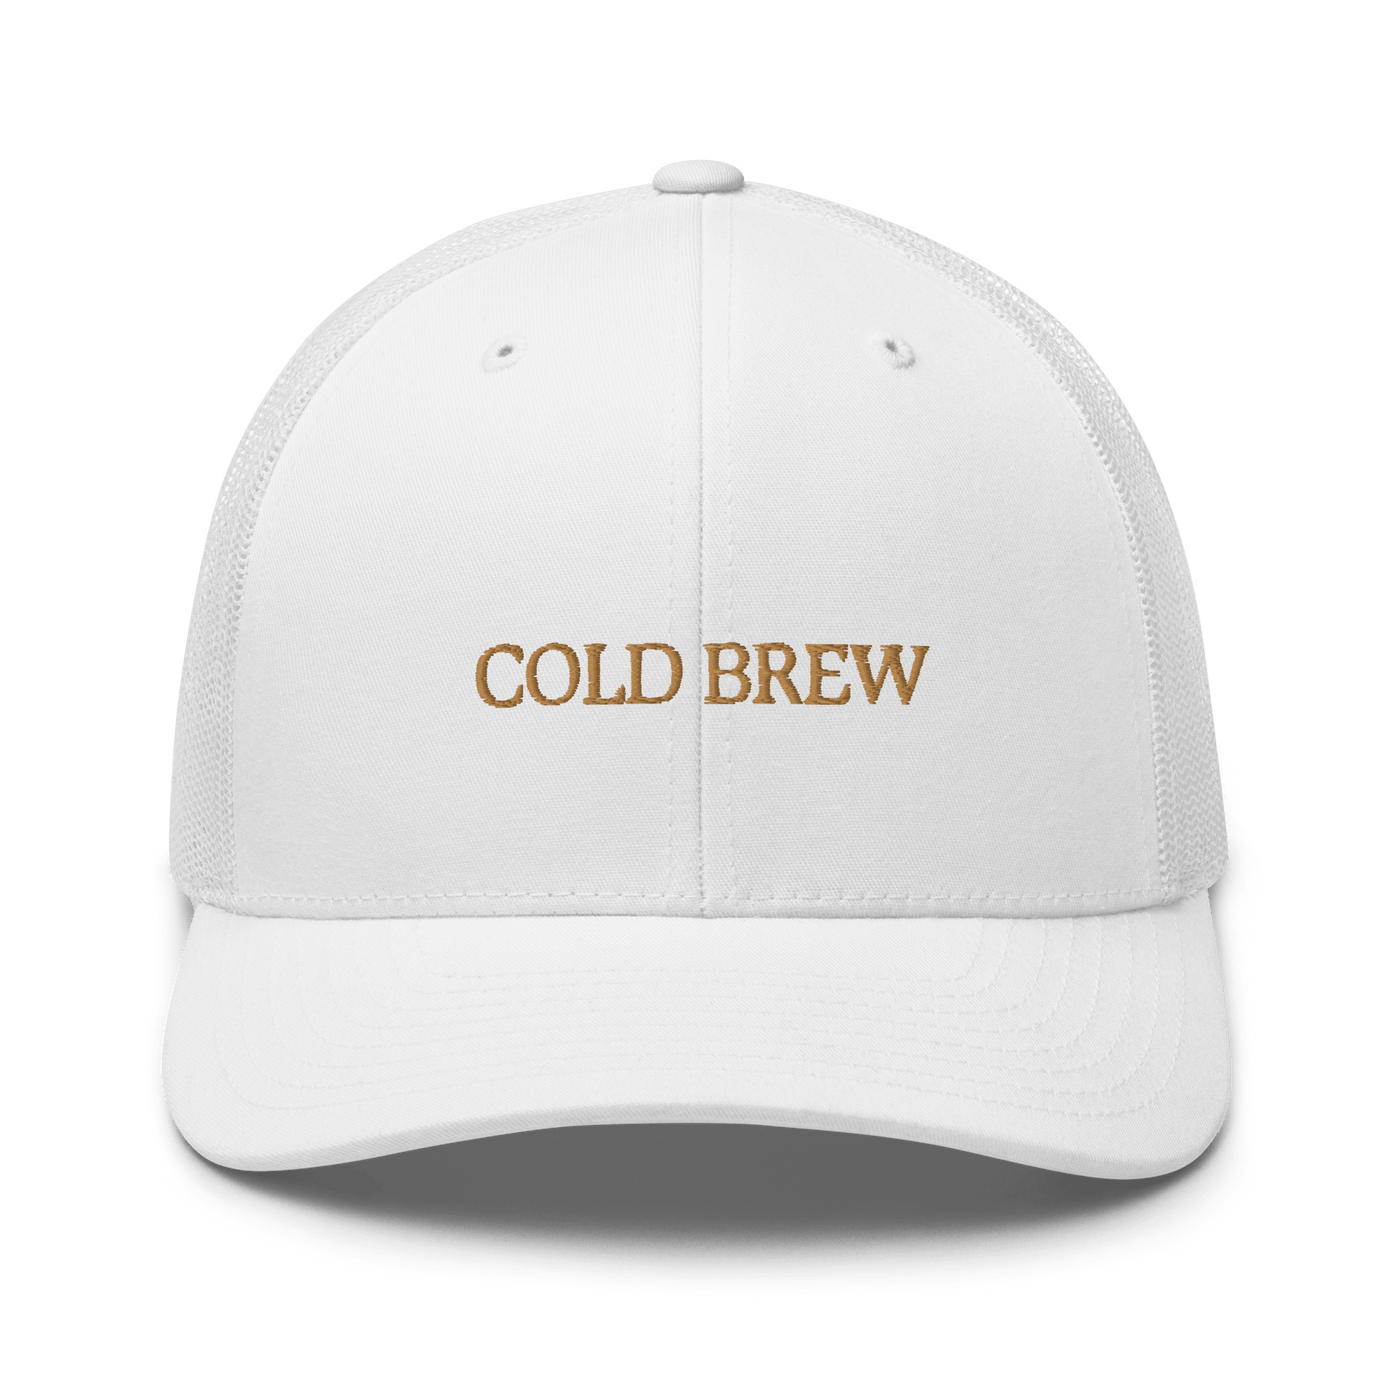 Cold Brew Trucker Cap - White - - Just Another Cap Store